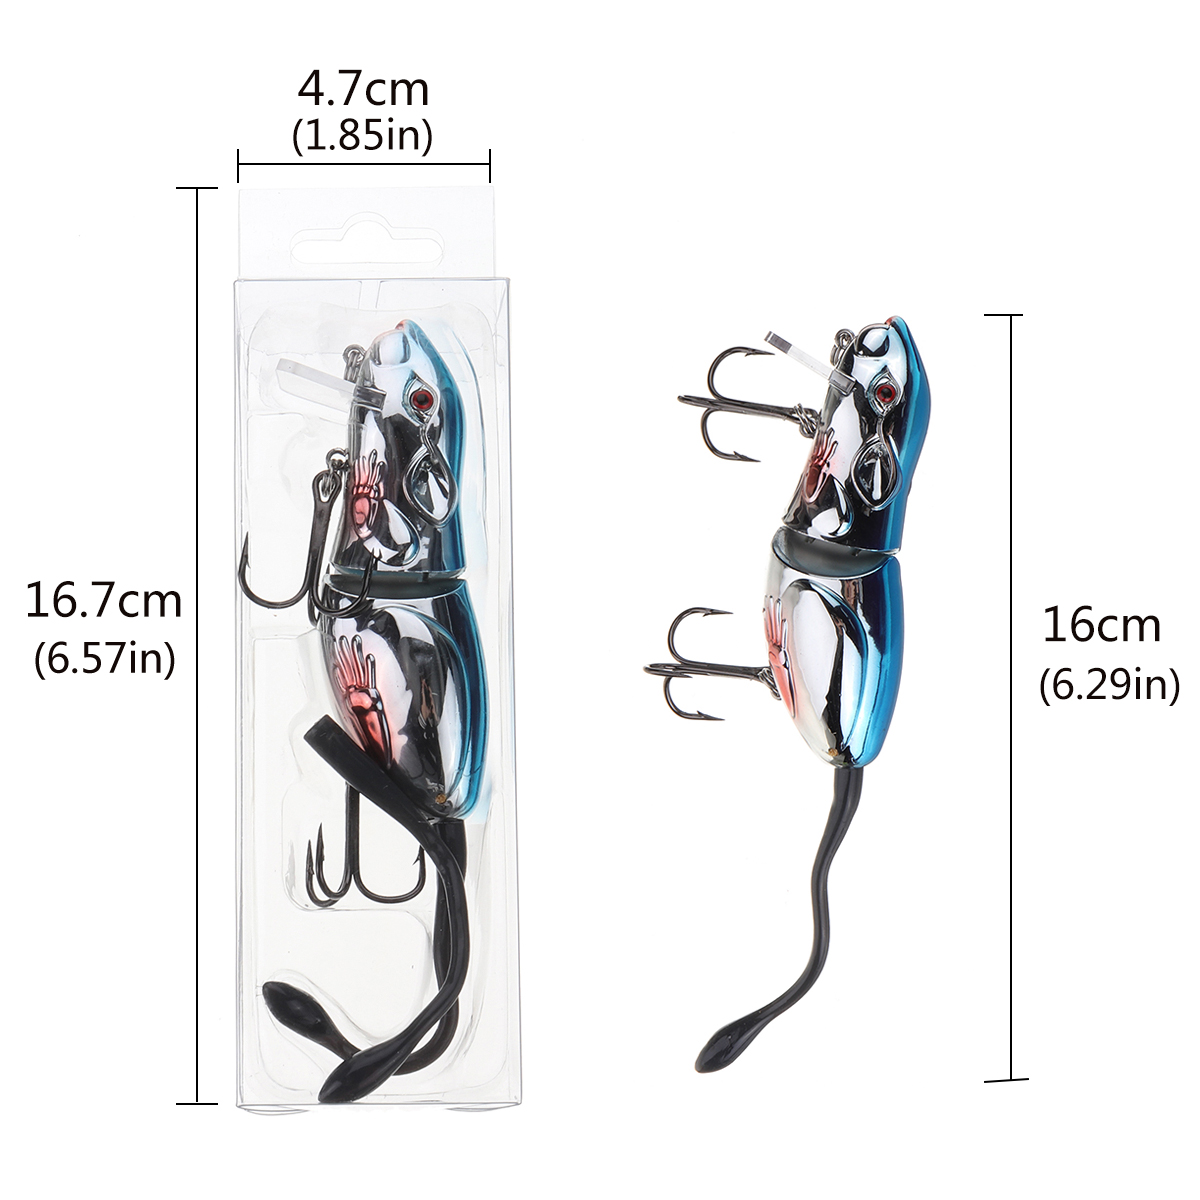 ZANLURE-1PC-16CM-45g-3D-Eyes-Mice-Rat-Shape-Lure-Artificial-Fishing-Bait-With-2-Hooks-Fishing-Tackle-1646066-4